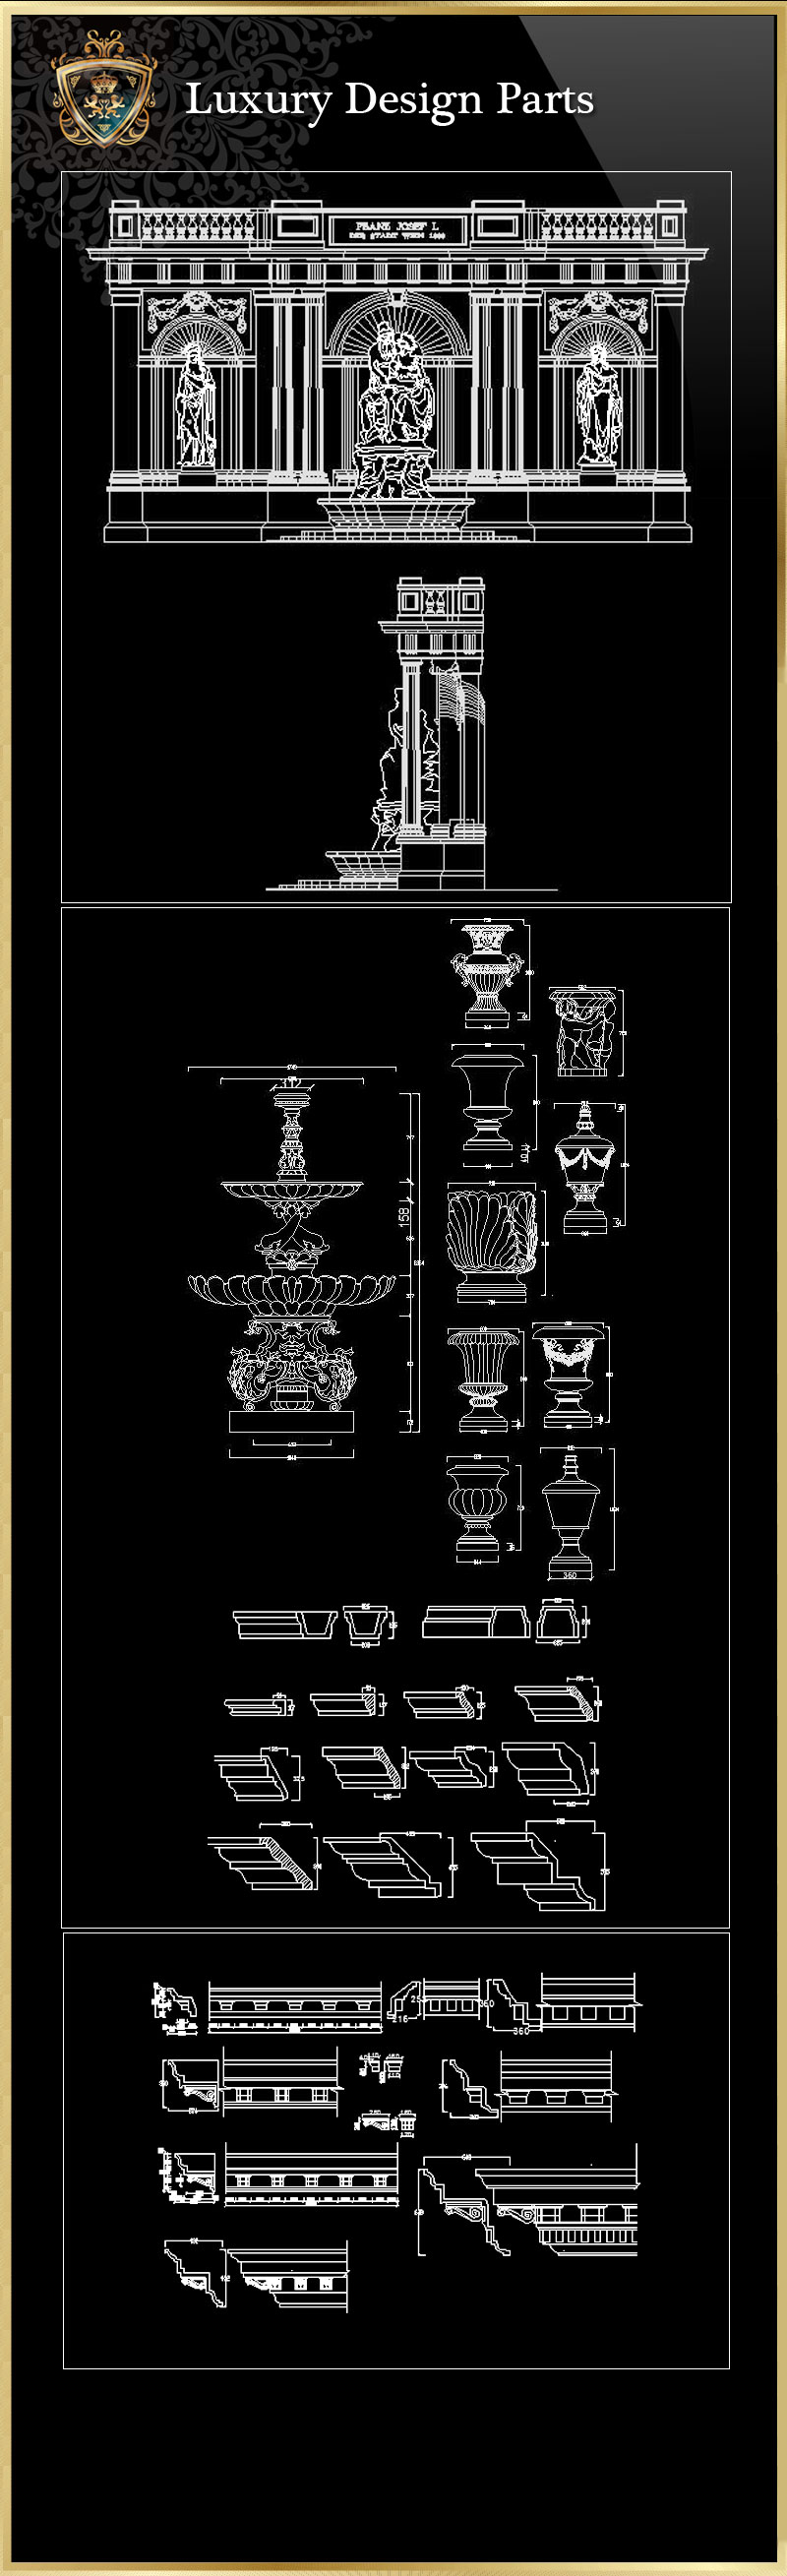 ★【Luxury Design Parts 2】Download Luxury Architectural Design CAD Drawings--Over 20000+ High quality CAD Blocks and Drawings Download!